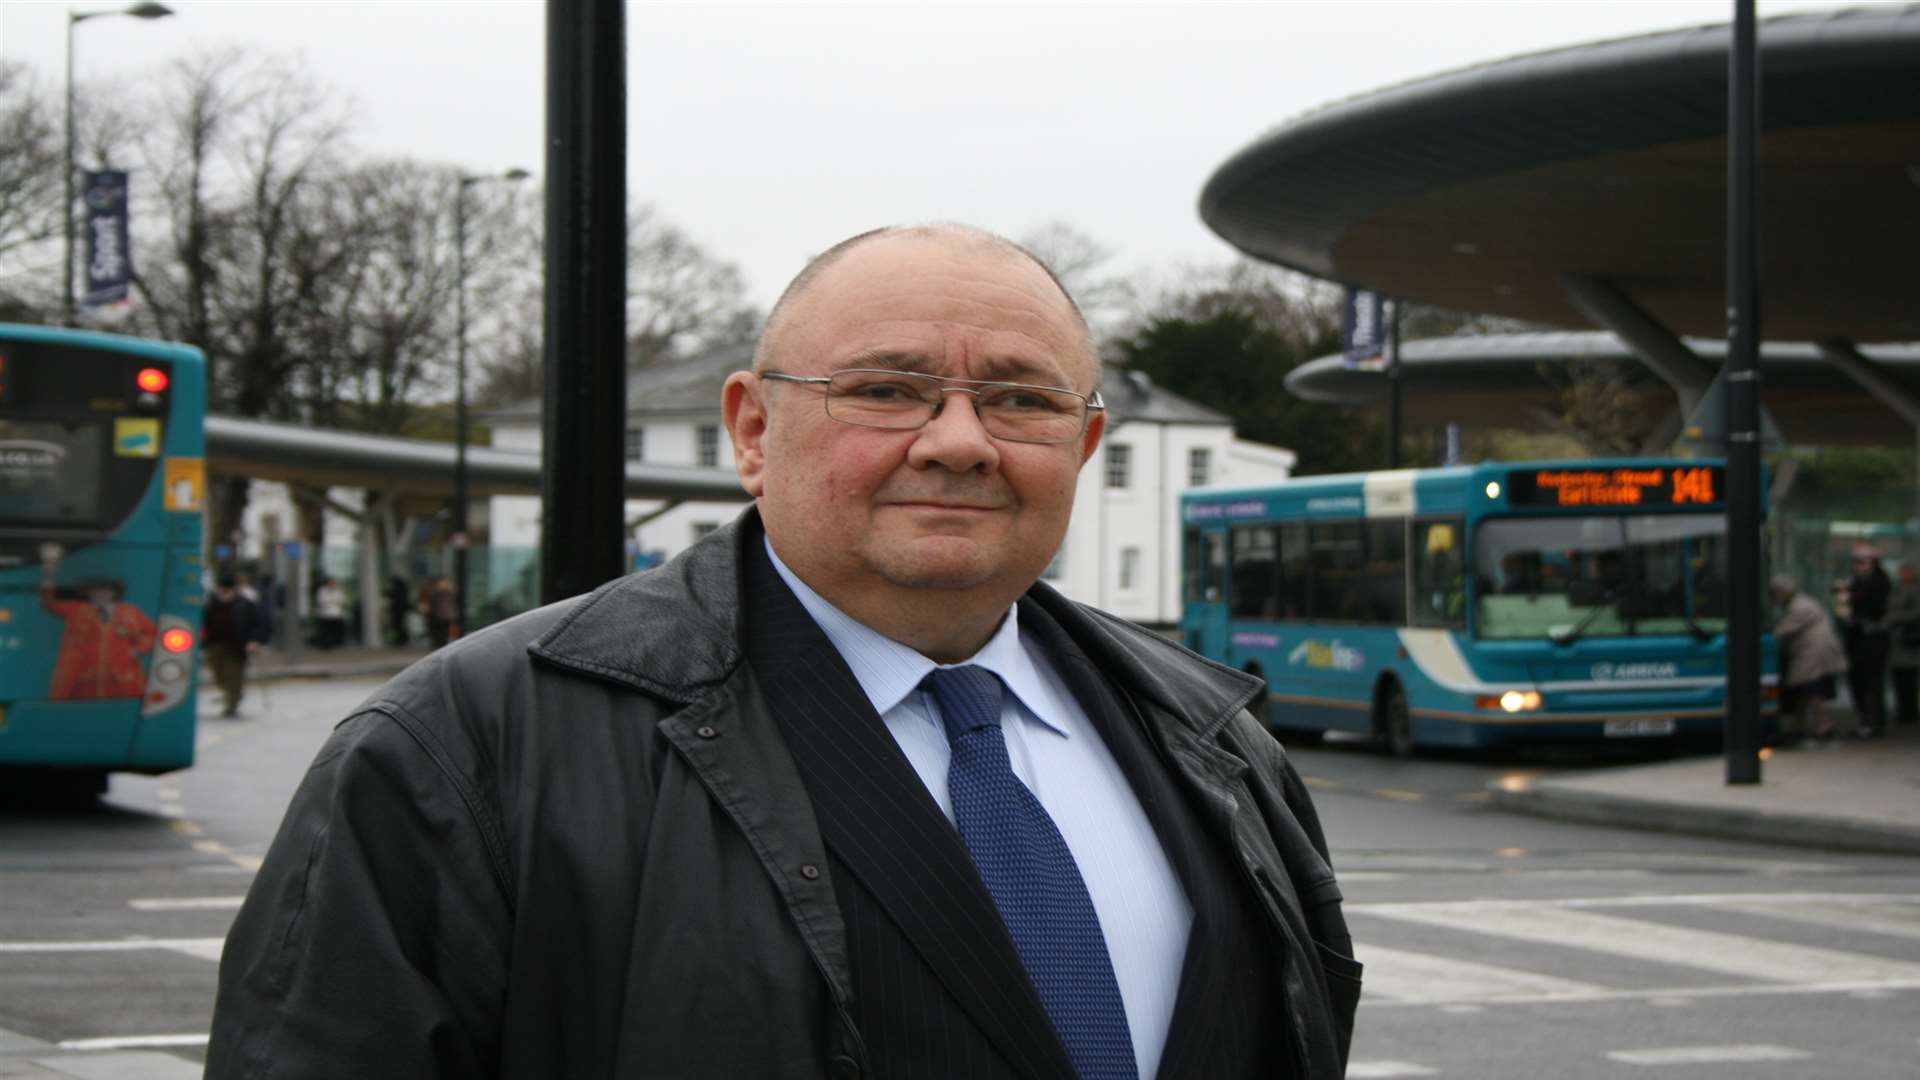 The council director at Chatham bus station